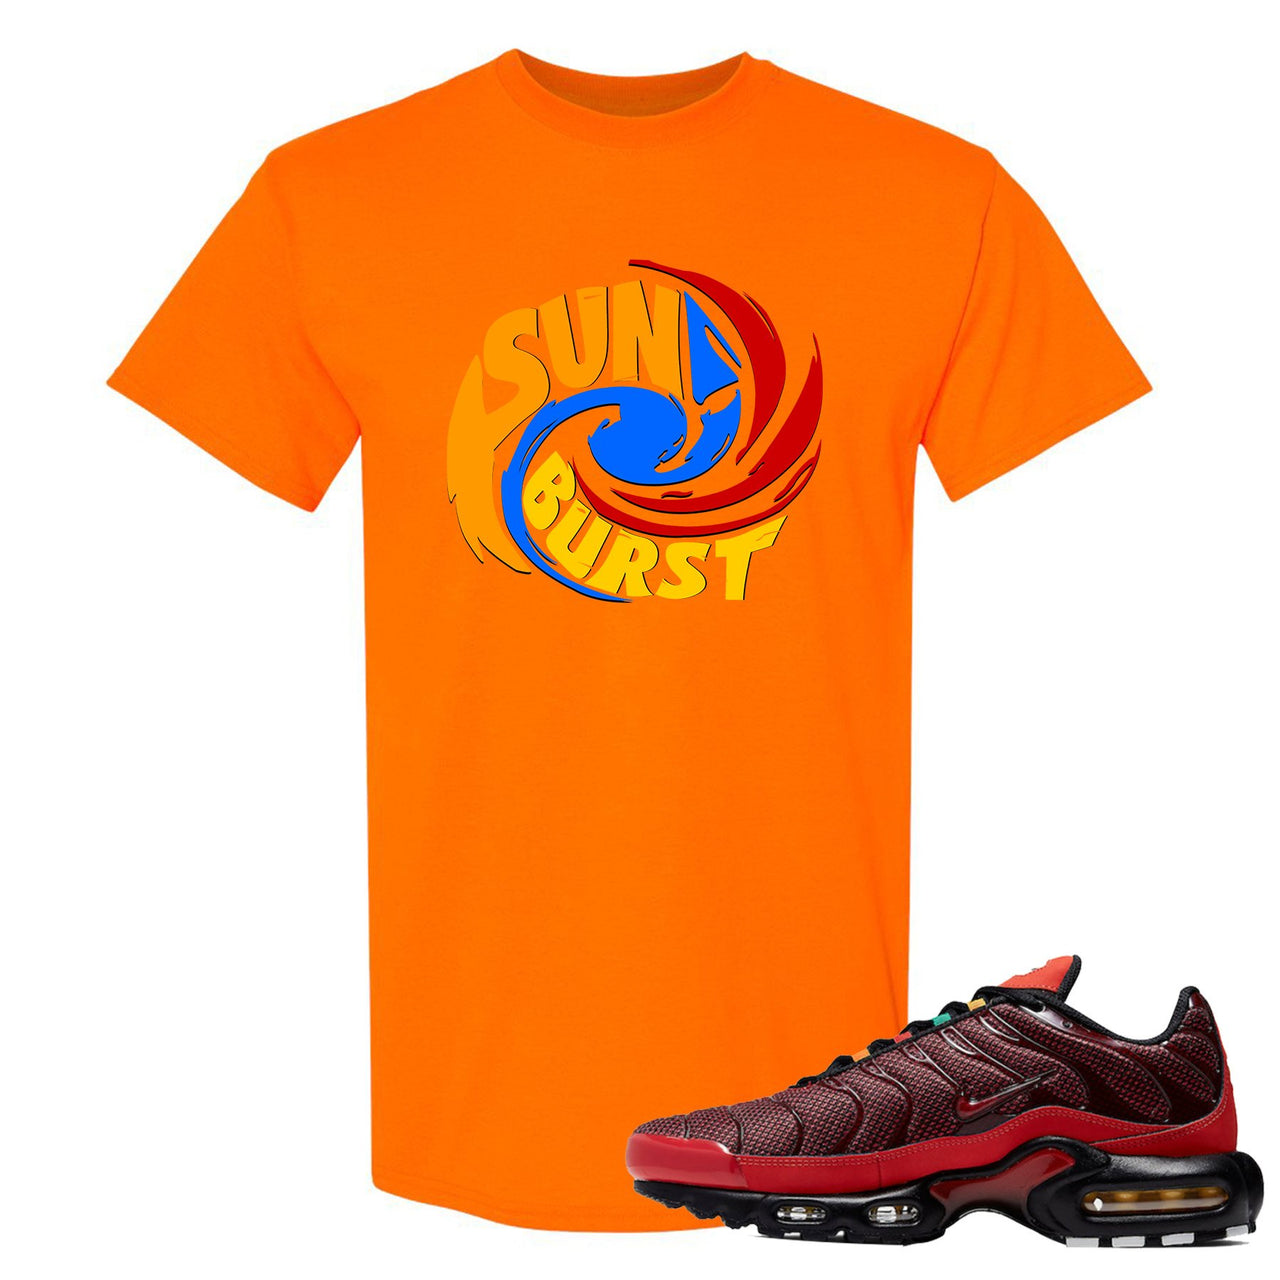 printed on the front of the air max plus sunburst sneaker matching safety orange tee shirt is the sunburst hurricane logo